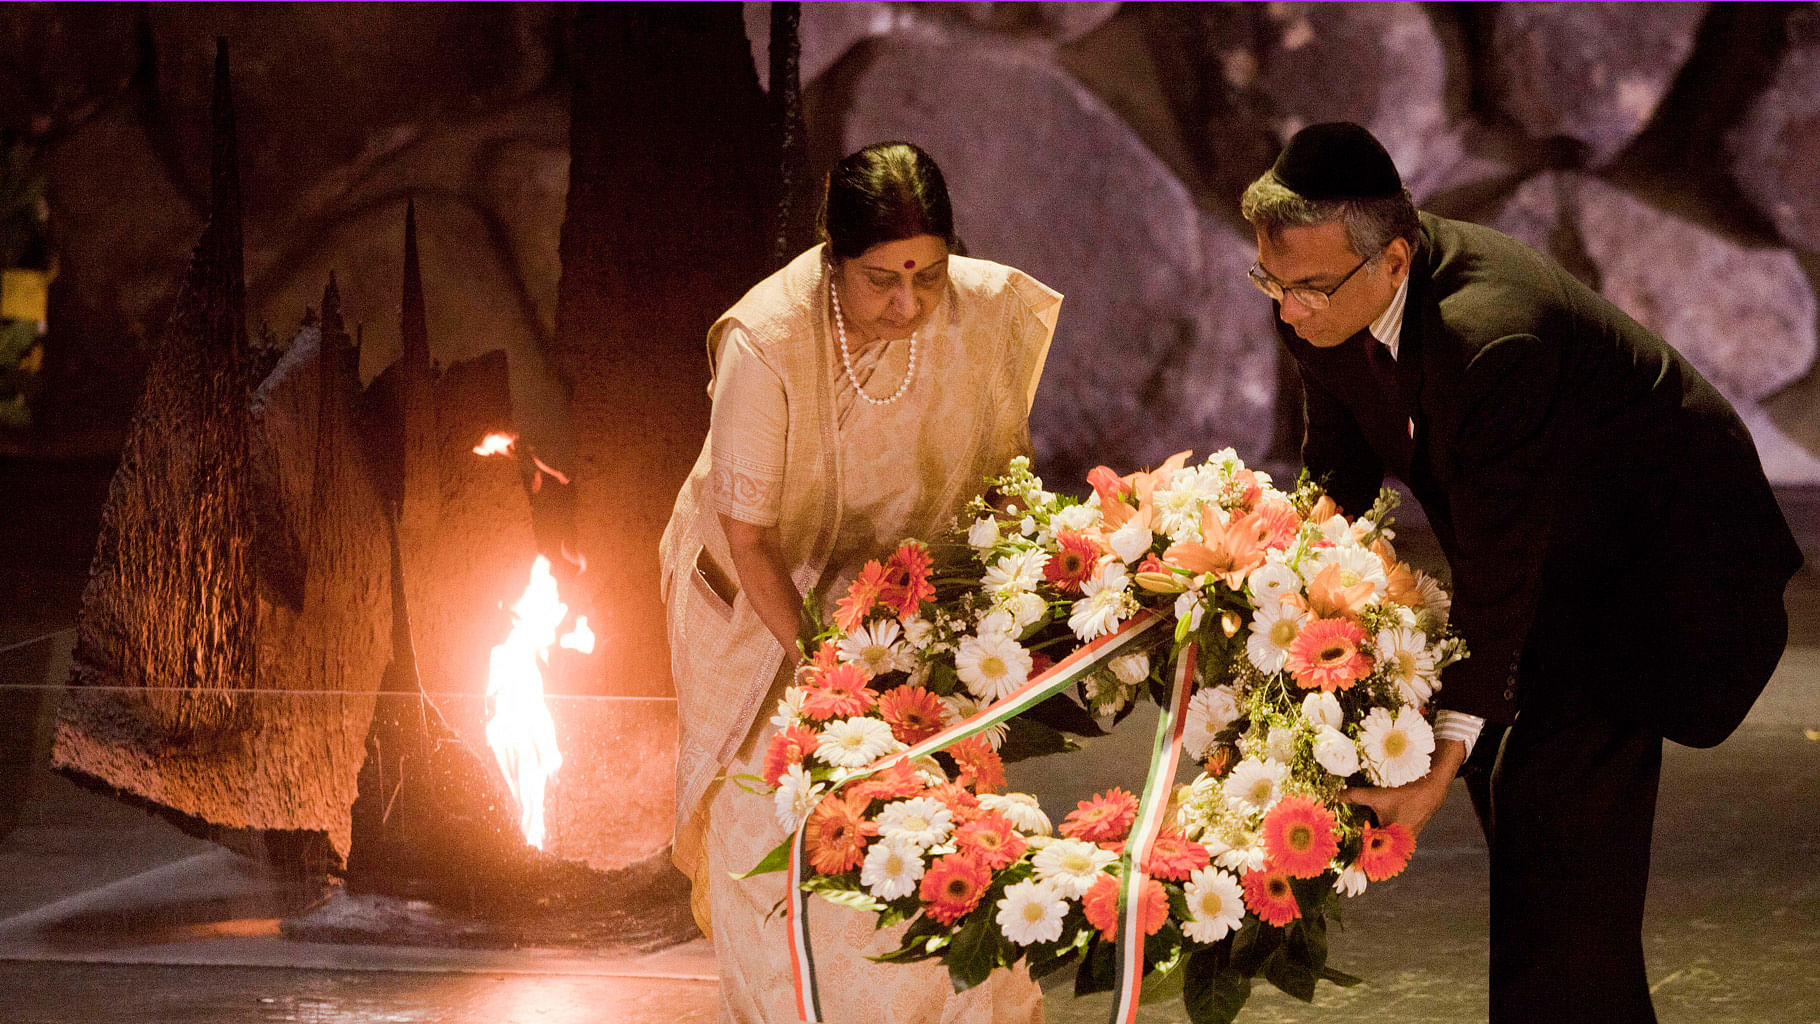 Minister of External Affairs, Sushma Swaraj, left, lay a wreath at the Hall of Remembrance at the Yad Vashem Holocaust memorial, in Jerusalem, Monday, January 18, 2016. (Photo: AP)